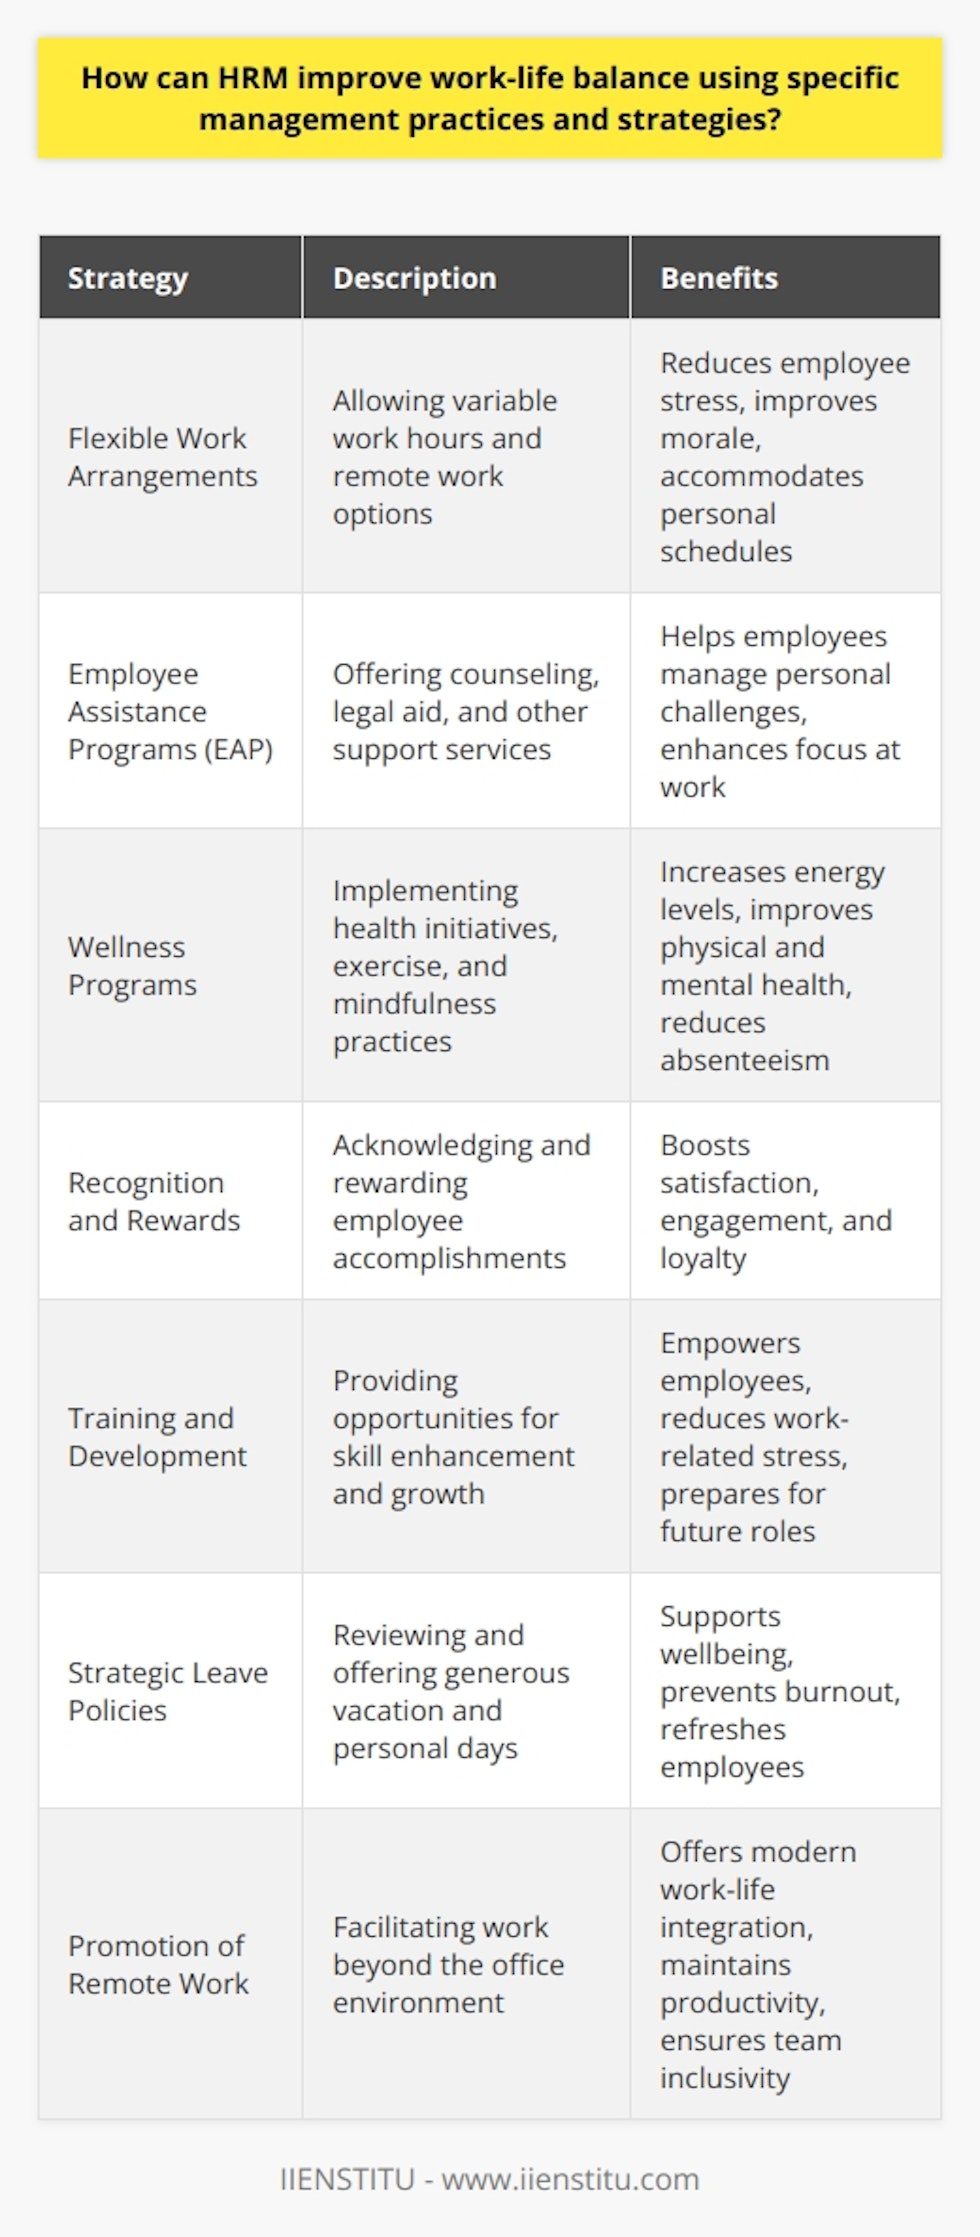 Effective Human Resources Management (HRM) is the cornerstone of creating a work environment that fosters work-life balance. By prioritizing the well-being of employees, companies can build a more engaged, loyal, and productive workforce. Here are a few strategies and practices HRM can adopt to promote work-life balance:Flexible Work ArrangementsImplementing flexible work schedules is a game-changer for work-life balance. Giving employees the option to start and end their workday at different times, or to work from home, allows them to tailor their work schedule to fit personal obligations. This flexibility can reduce stress and improve morale.Comprehensive Employee Assistance ProgramsAn effective Employee Assistance Program (EAP) can be a lifeline for employees tackling life's challenges. Whether it's counseling services, legal assistance, or addiction programs, EAPs that address a wide range of personal and professional issues ensure employees don't have to face their problems alone. The support provided through EAPs allows employees to focus better at work and feel supported by their employer.Wellness ProgramsPhysical and mental wellness are critical to achieving work-life balance. HR can implement programs that encourage regular exercise, healthy eating, and mindfulness practices. By providing resources for physical activities and stress reduction, employees can maintain higher energy levels and cope better with work demands.Recognition and RewardsA culture that recognizes and rewards hard work can boost employee satisfaction and engagement. Simple gestures like acknowledging an employee's efforts publicly or giving small rewards for a job well done can make a significant difference. When employees feel valued, their workplace happiness can permeate into their personal life.Training and Development InitiativesHRM should not overlook the significance of professional growth in the work-life equation. Training and development opportunities allow employees to feel invested in and prepare them for future challenges. Skill development is particularly empowering and can decrease work-related stress as employees become more competent and confident in their roles.Strategic Leave PoliciesHRM can review and adjust leave policies to be more accommodating. Generous vacation time and personal days, along with the option to take sabbaticals or extended leave, can help employees recharge and avoid burnout. In addition, providing time off for volunteer work can boost employee morale and provide a sense of purpose beyond the workplace.Promotion of Remote WorkNow more than ever, remote work is a viable option for many job roles. HRM that facilitates remote work demonstrates an understanding of modern work-life challenges. By providing the necessary tools and maintaining regular communication, employees can feel part of the team, be productive, and also enjoy the comforts of home.In the digital age, HRM has the tools and resources at its disposal to tailor work-life balance strategies effectively. Implementing these approaches requires commitment and a cultural shift within the organization. However, the results can lead to a more motivated, satisfied workforce that values their employer's efforts to harmonize their work and personal lives.